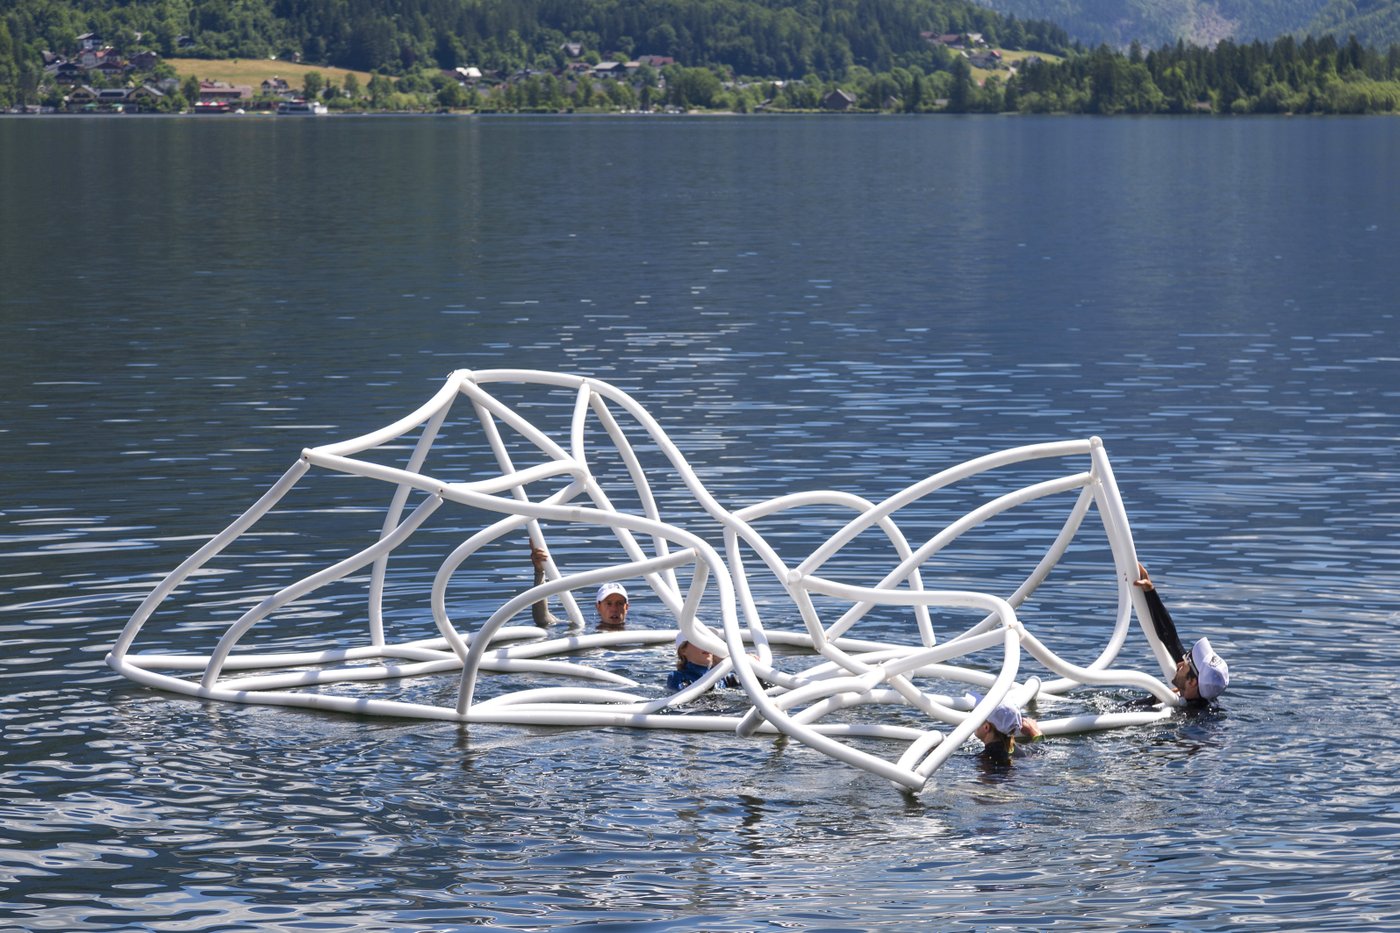 Four people swimming in a mountain lake with an object that looks like a large white flexible scaffold